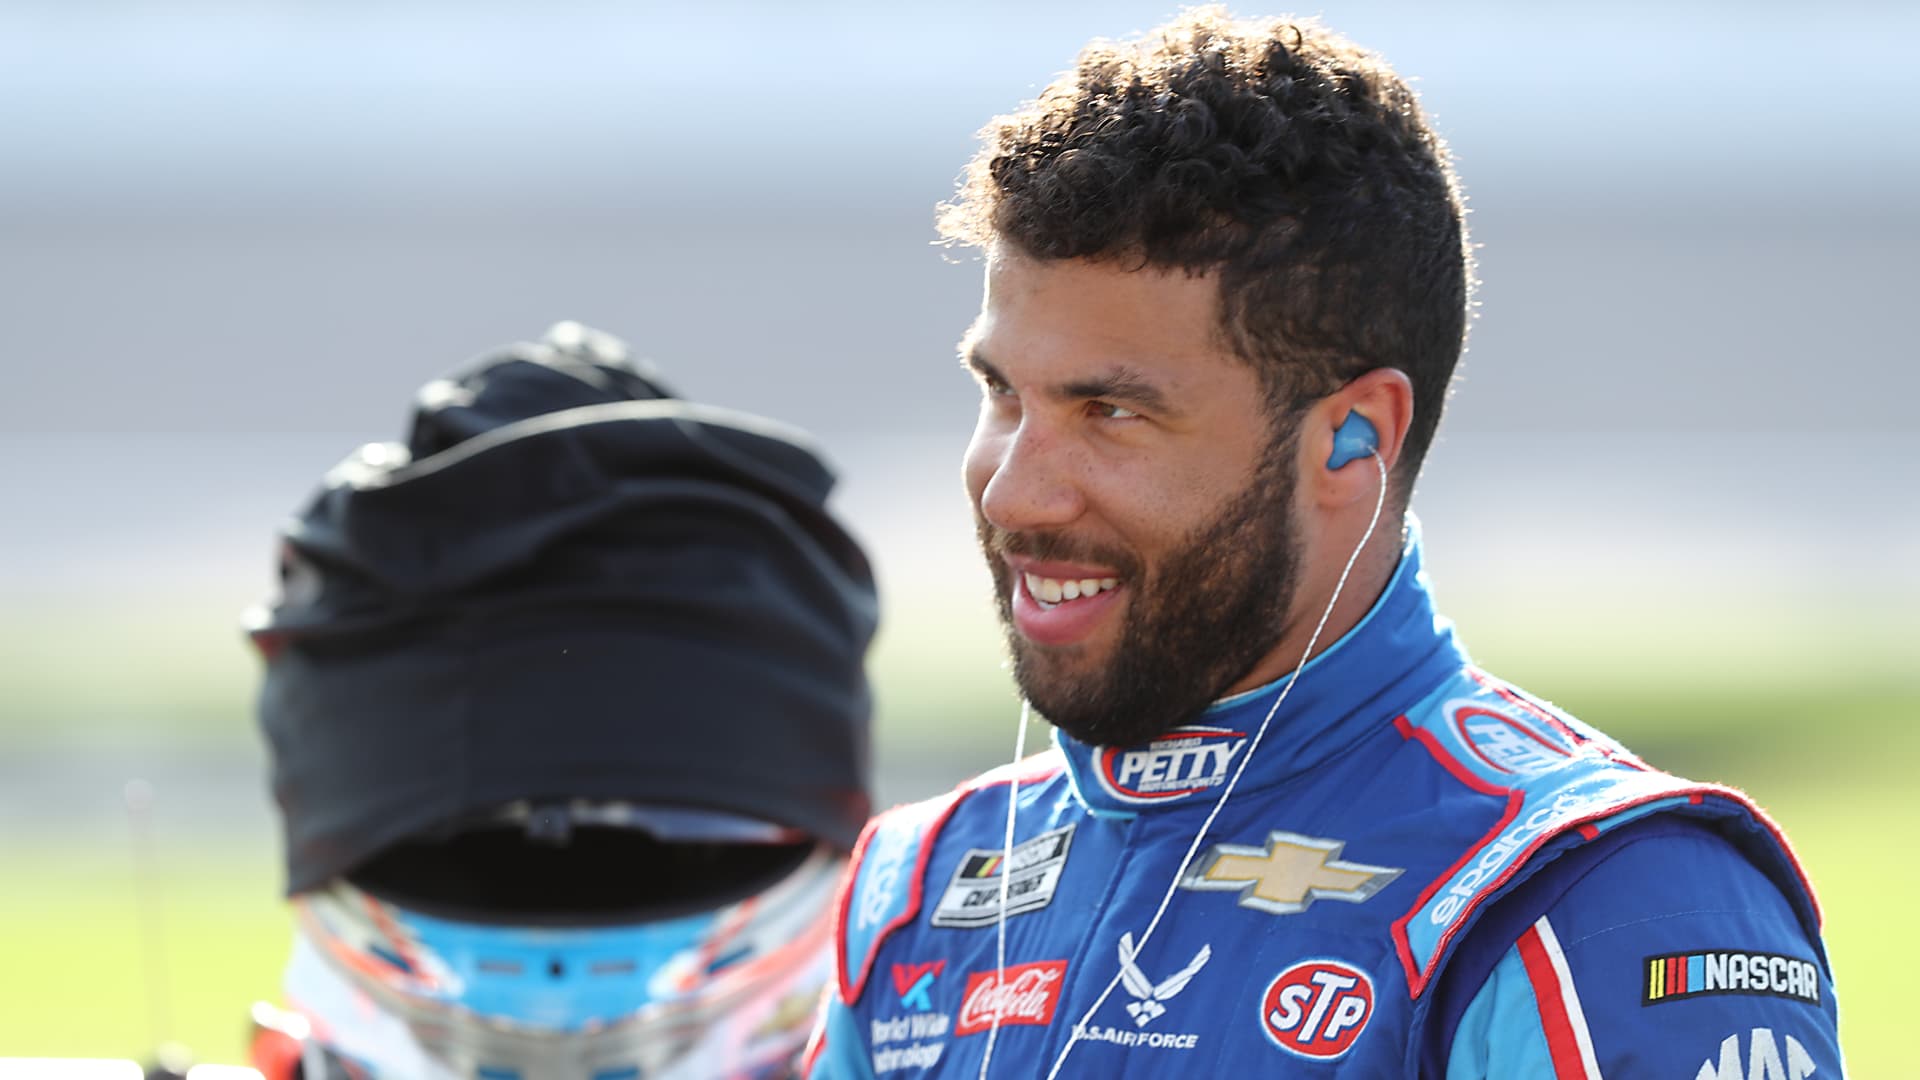 Bubba Wallace, driver of the #43 Victory Junction Chevrolet, prepares for the NASCAR Cup Series Super Start Batteries 400 Presented by O'Reilly Auto Parts at Kansas Speedway on July 23, 2020 in Kansas City, Kansas.